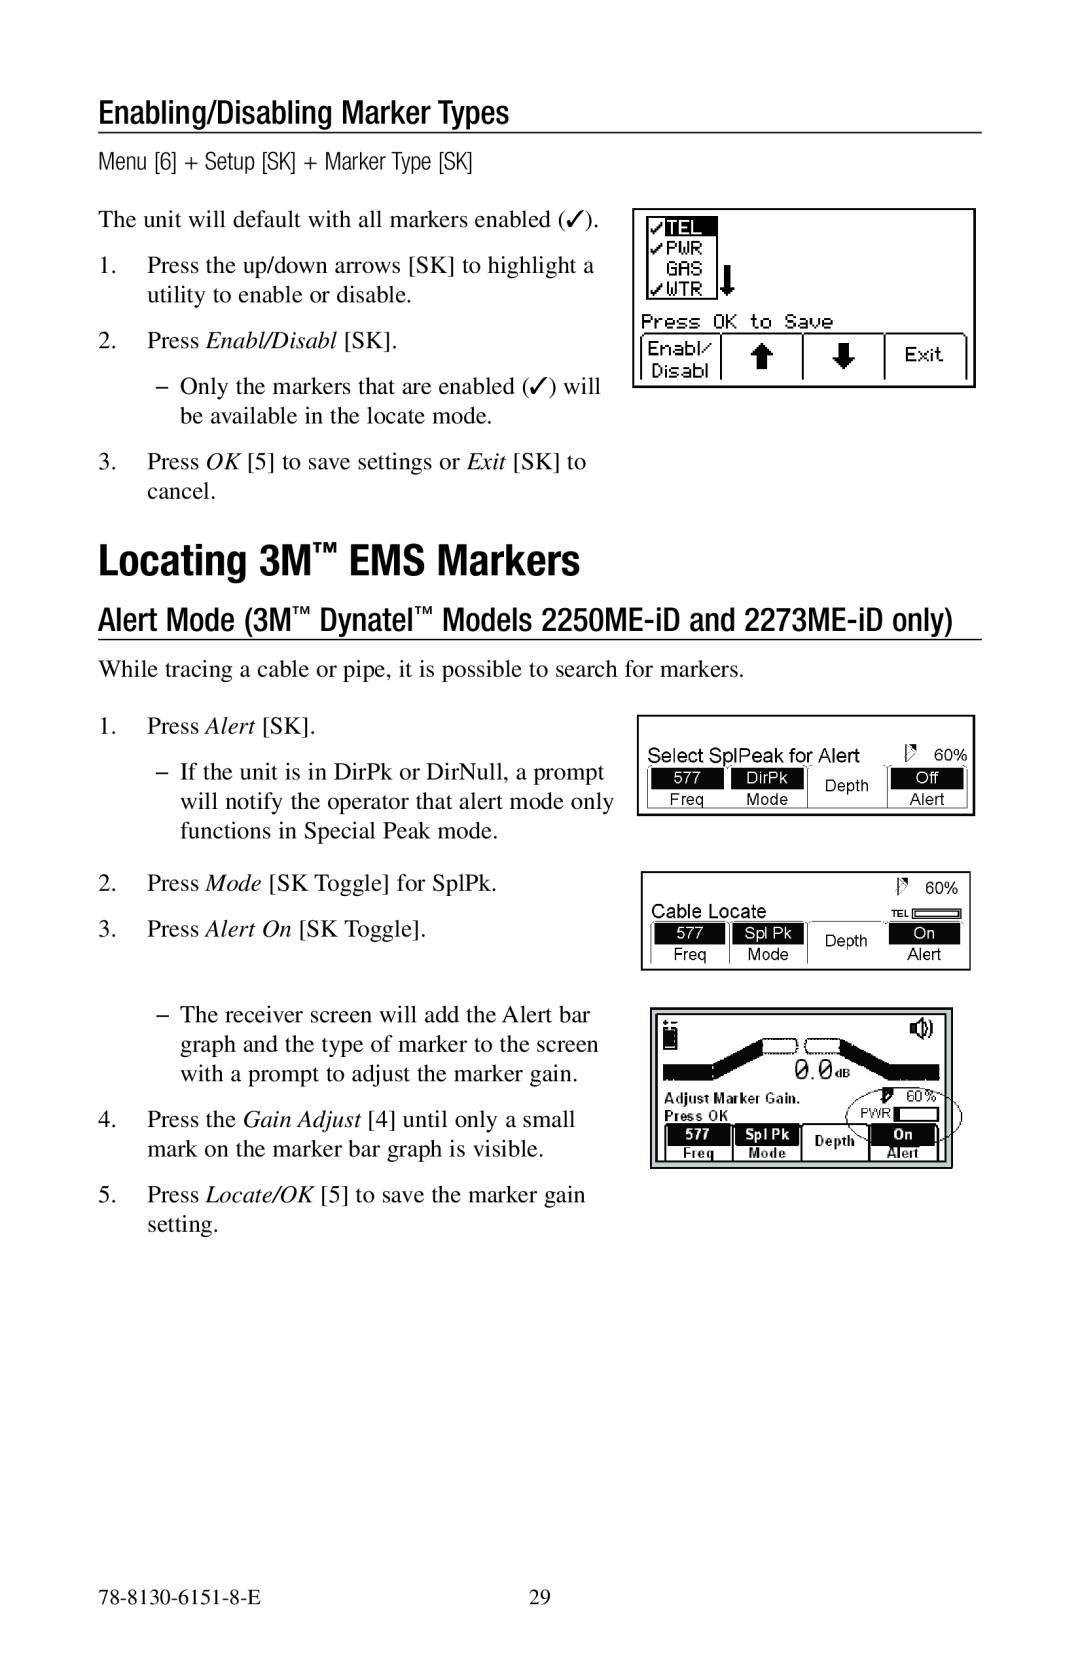 3M 2250ME-iD, 2273ME-iD manual Locating 3M EMS Markers, Enabling/Disabling Marker Types, Press Enabl/Disabl SK 